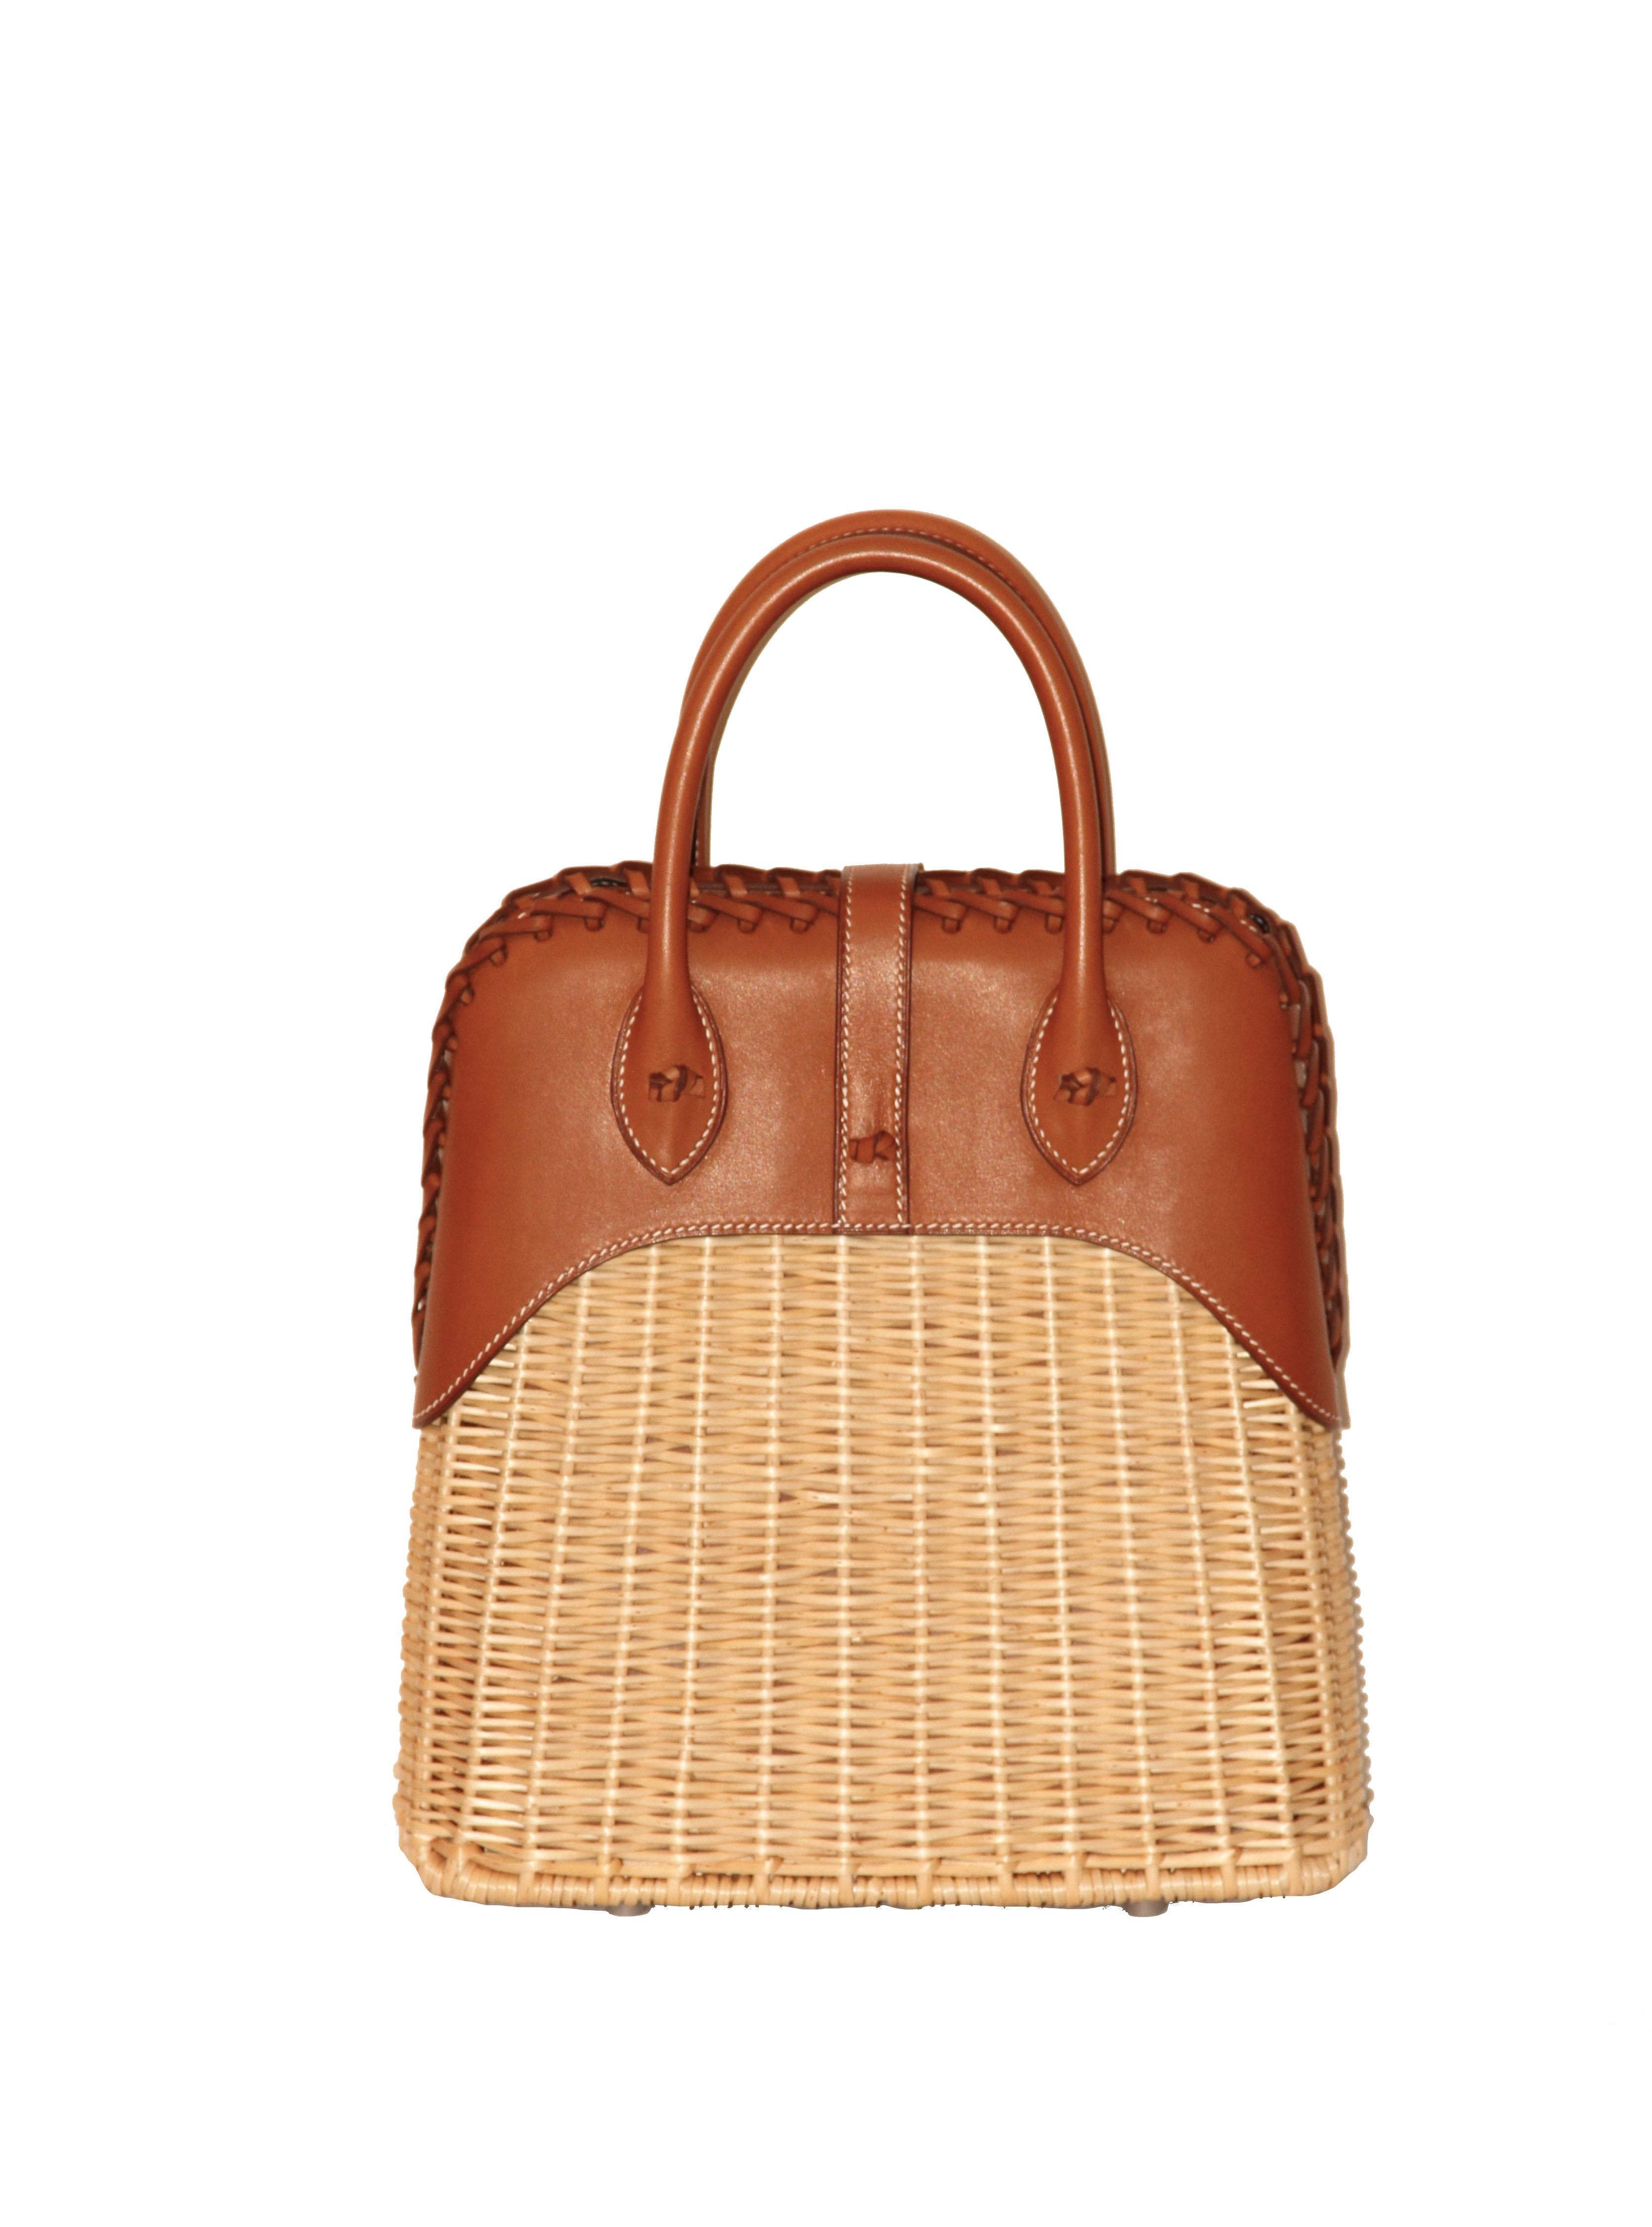 This exquisite and amazing Bolide Picnic bag is made of Barenia leather and woven wicker.
The front leather strap closes with with a Clou de Selle button and a braided leather piece finishes the top of the bag.
The double handles are decorated with